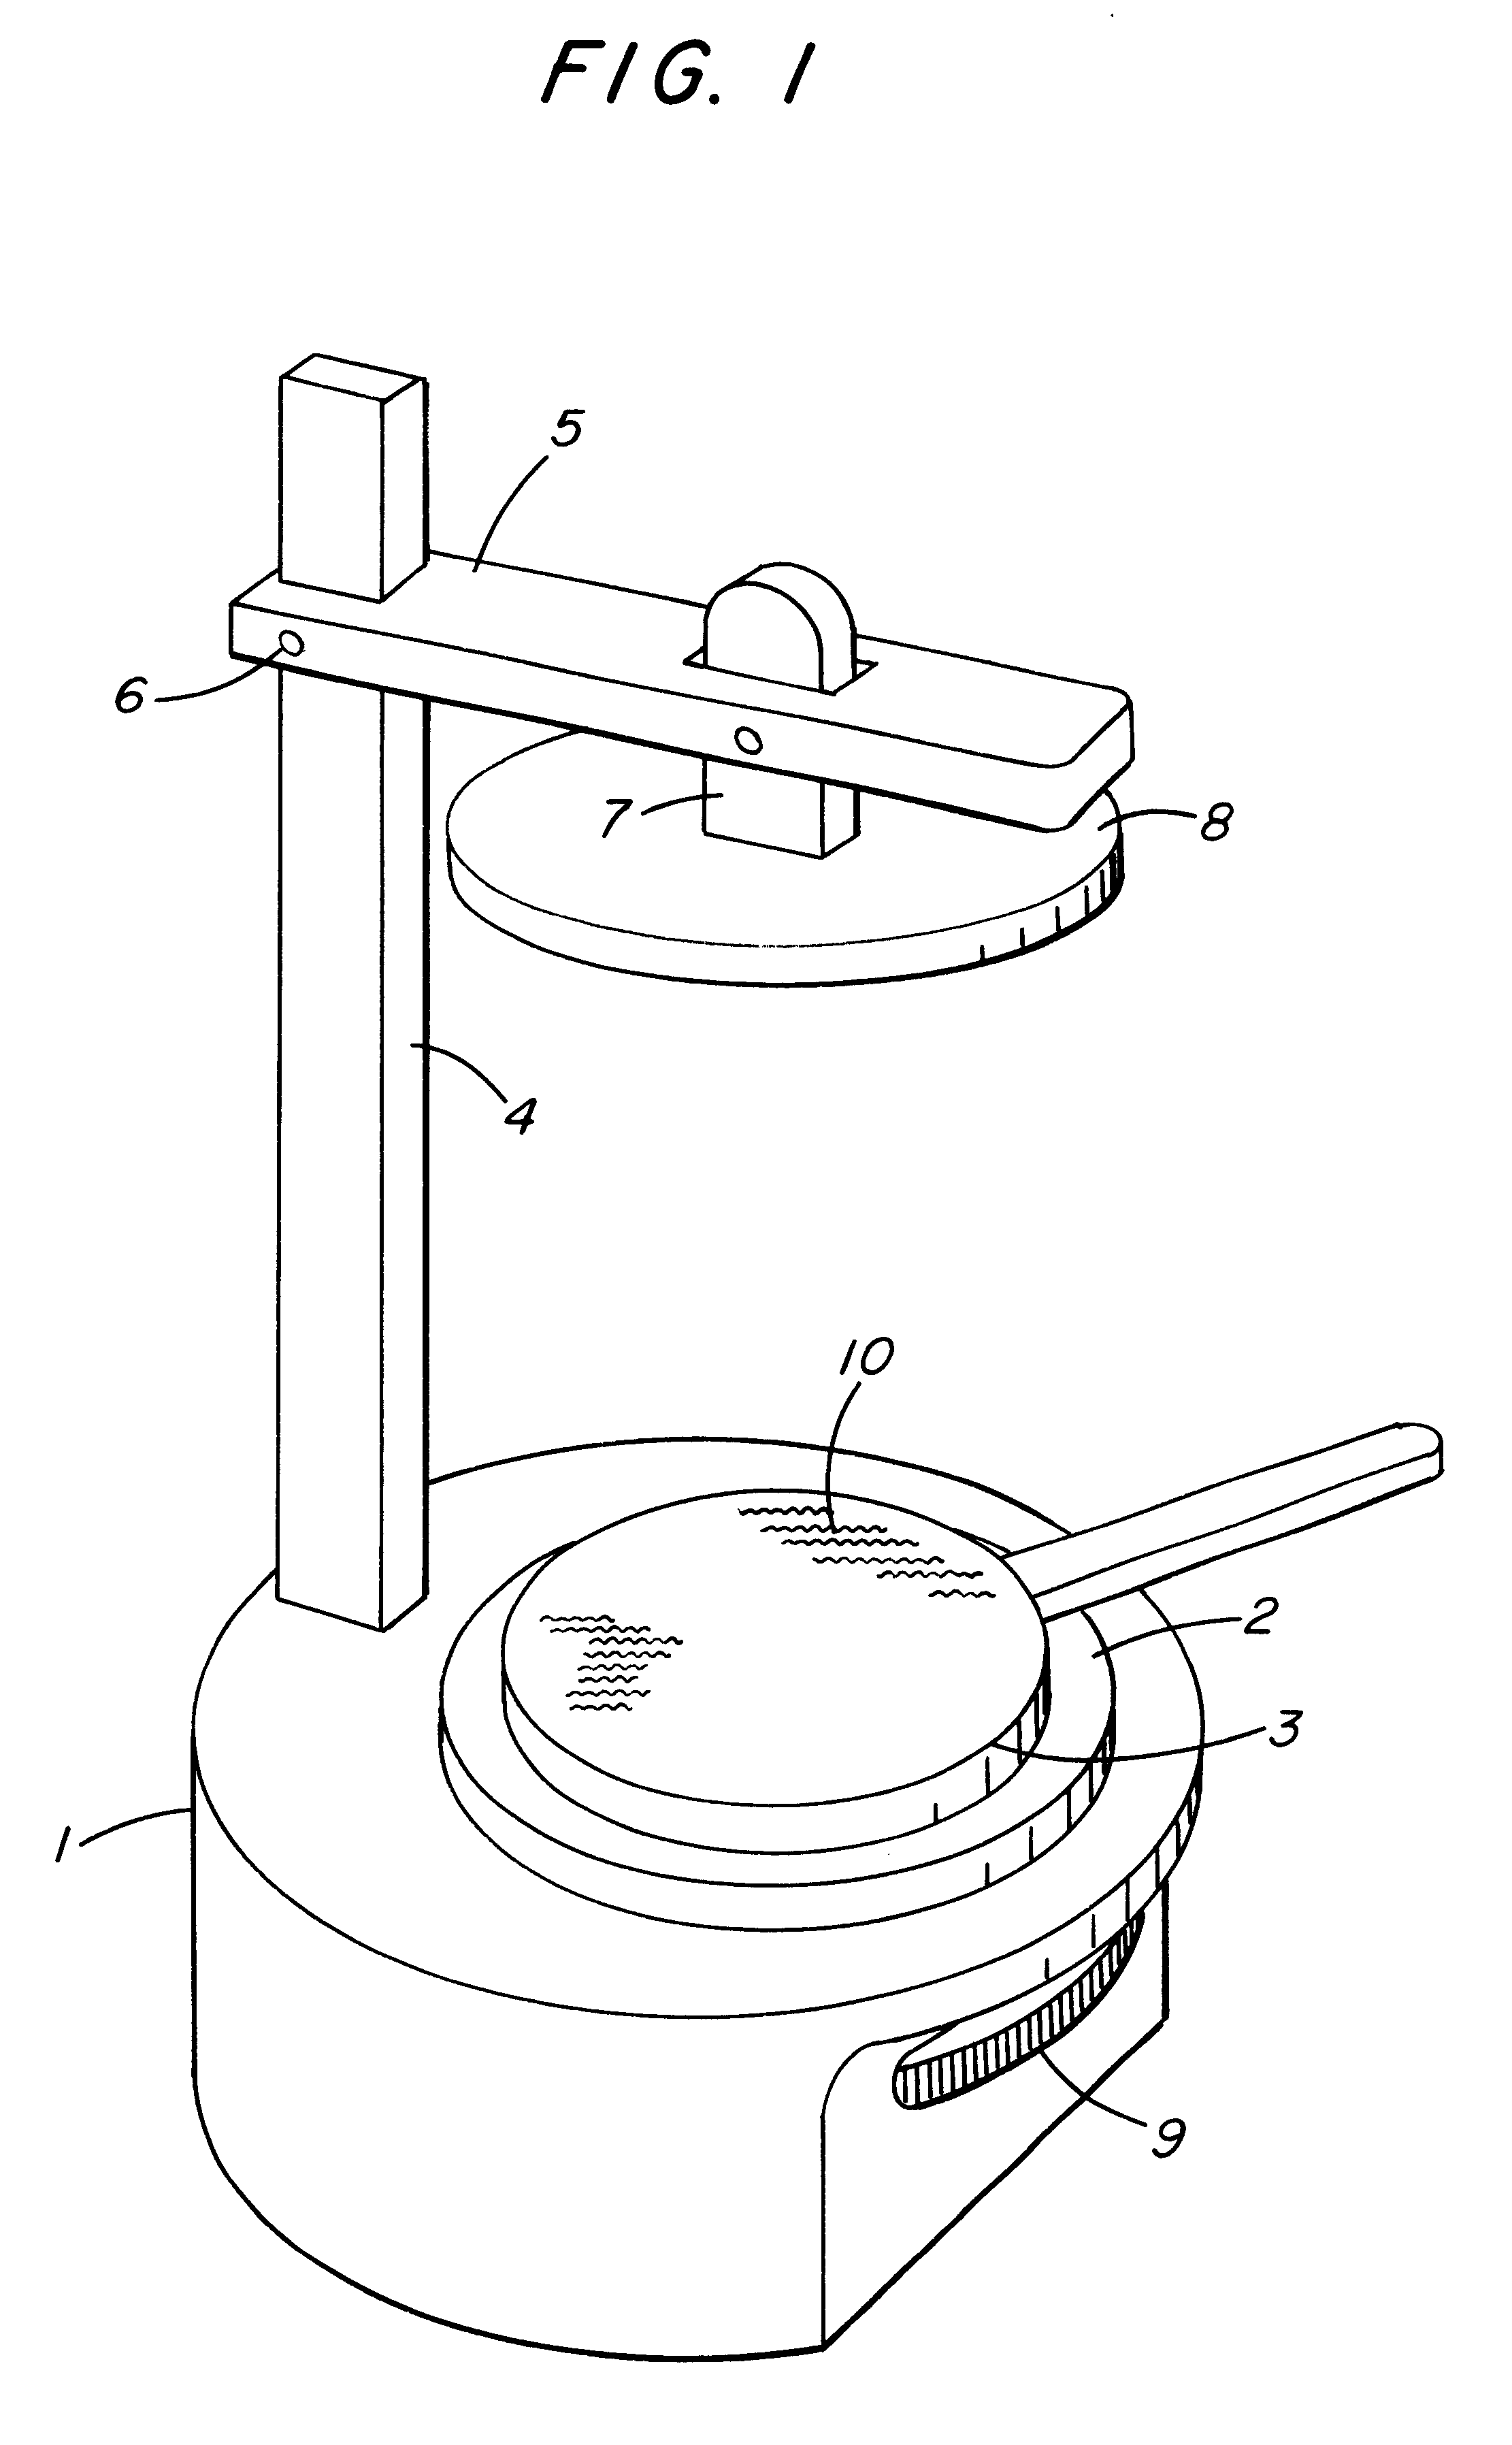 Method and apparatus for loosening a closure from a container